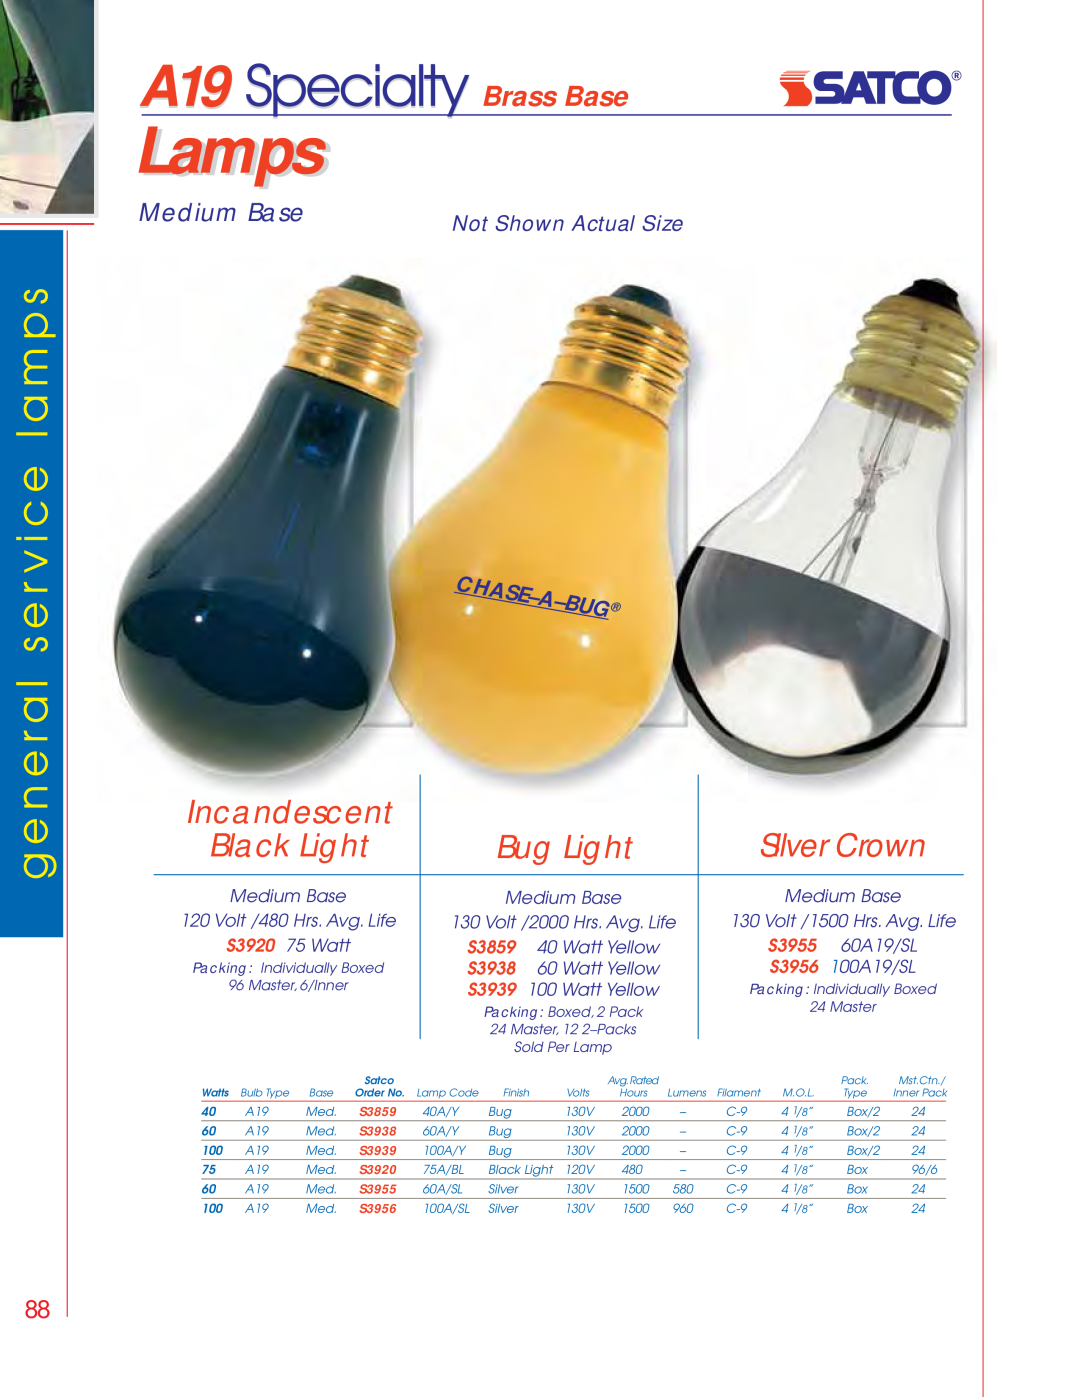 Satco Products S3692 Lamps, A19 Specialty Brass Base, Incandescent, Black Light, Bug Light, S3920, S3859, S3955, S3938 